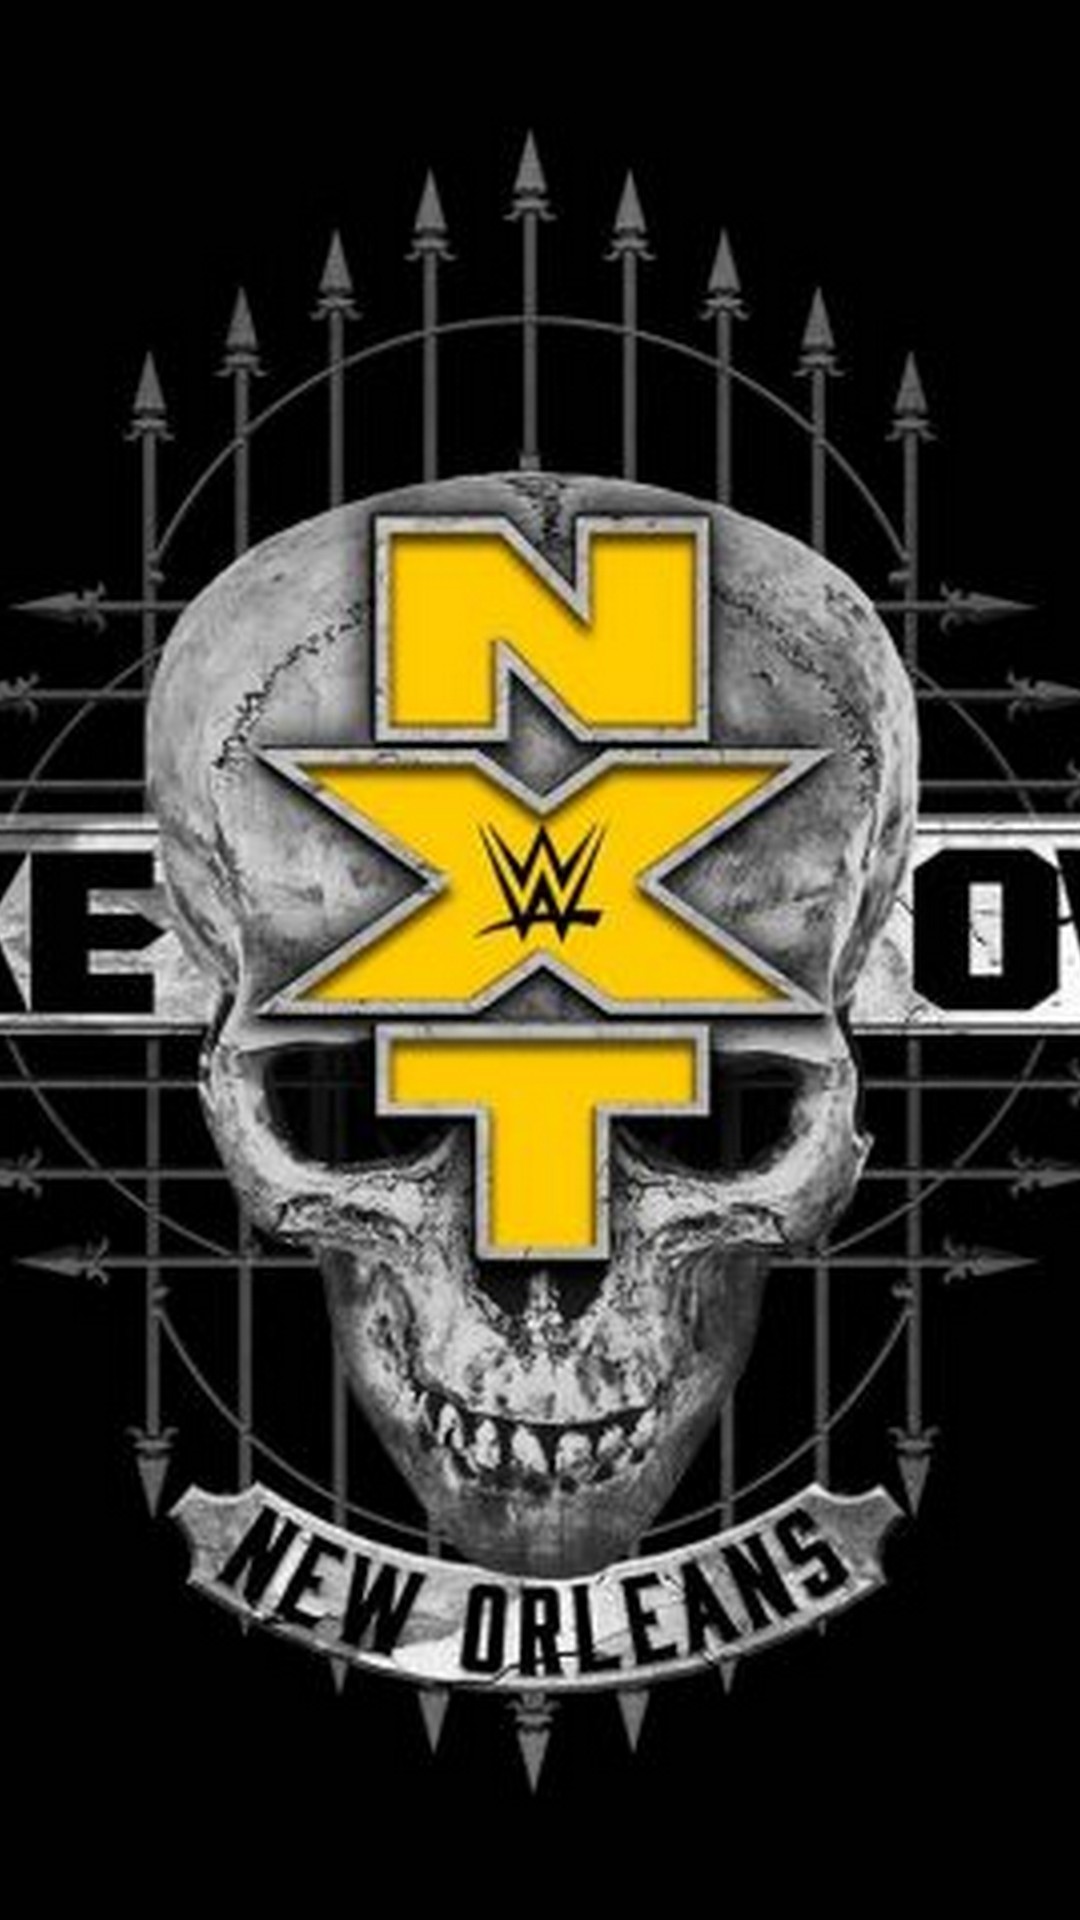 NXT Takeover New Orleans iPhone Wallpaper With high-resolution 1080X1920 pixel. You can use this wallpaper for your iPhone 5, 6, 7, 8, X, XS, XR backgrounds, Mobile Screensaver, or iPad Lock Screen